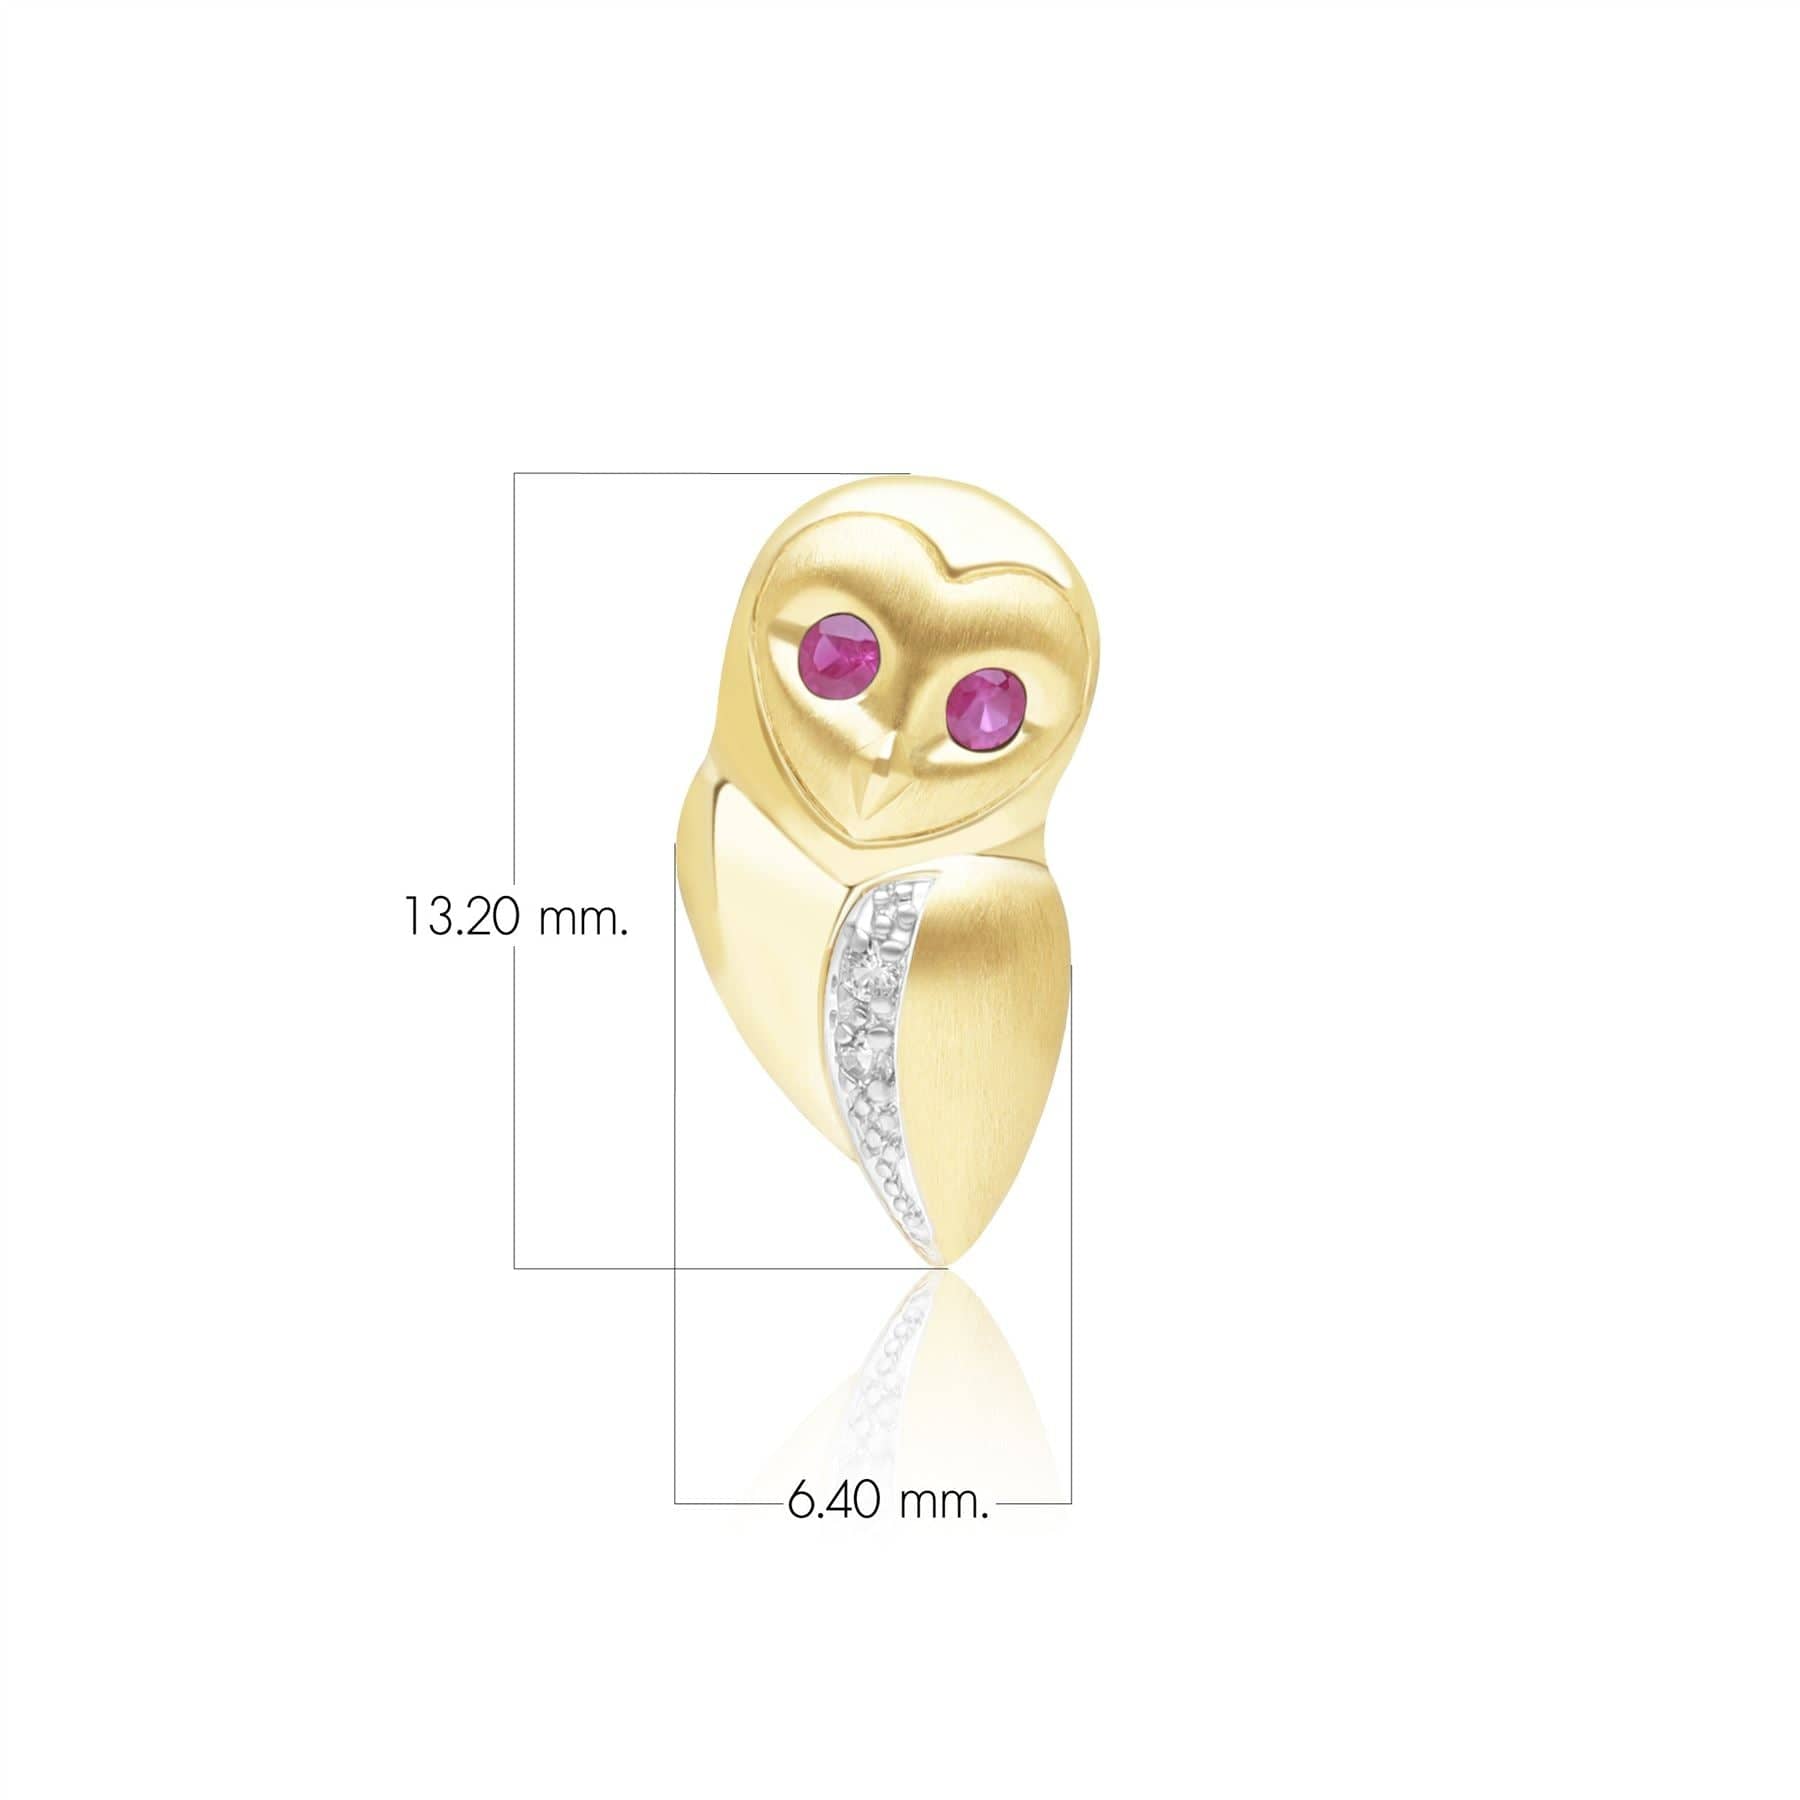 135T0004019 Gardenia Ruby and White Sapphire Owl Pin in 9ct Yellow Gold Dimensions